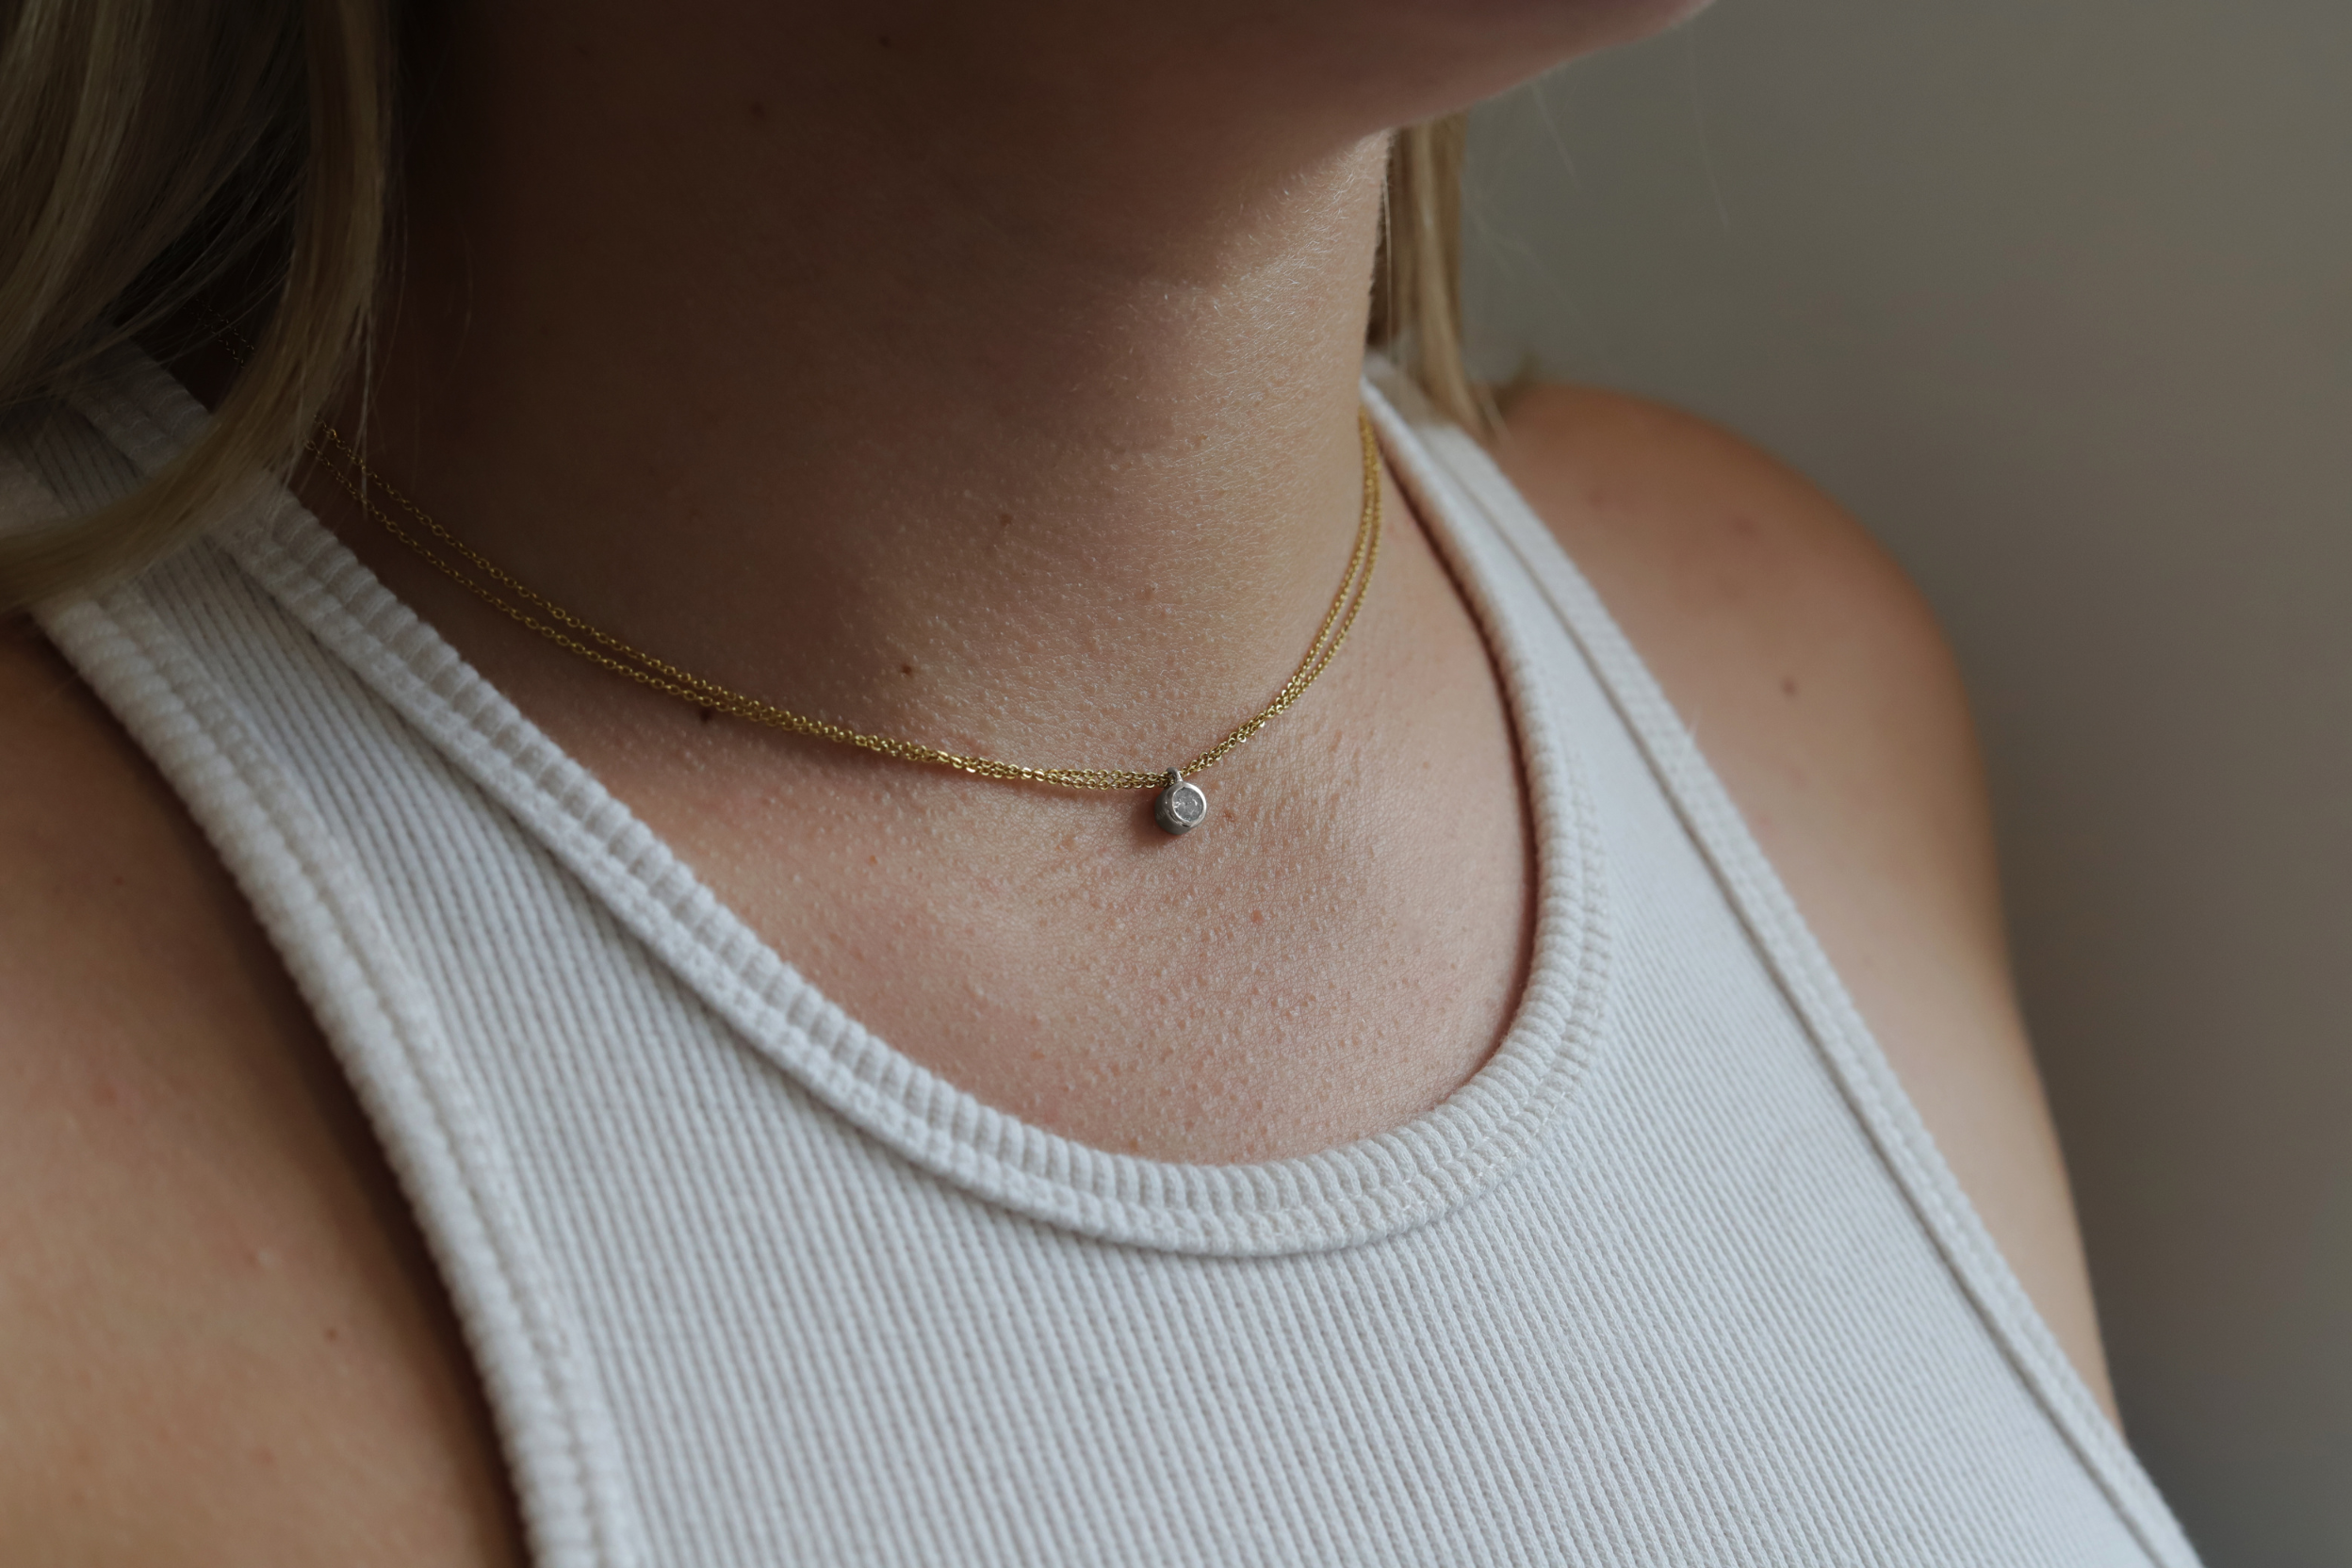 Choosing a Necklace for your Neckline